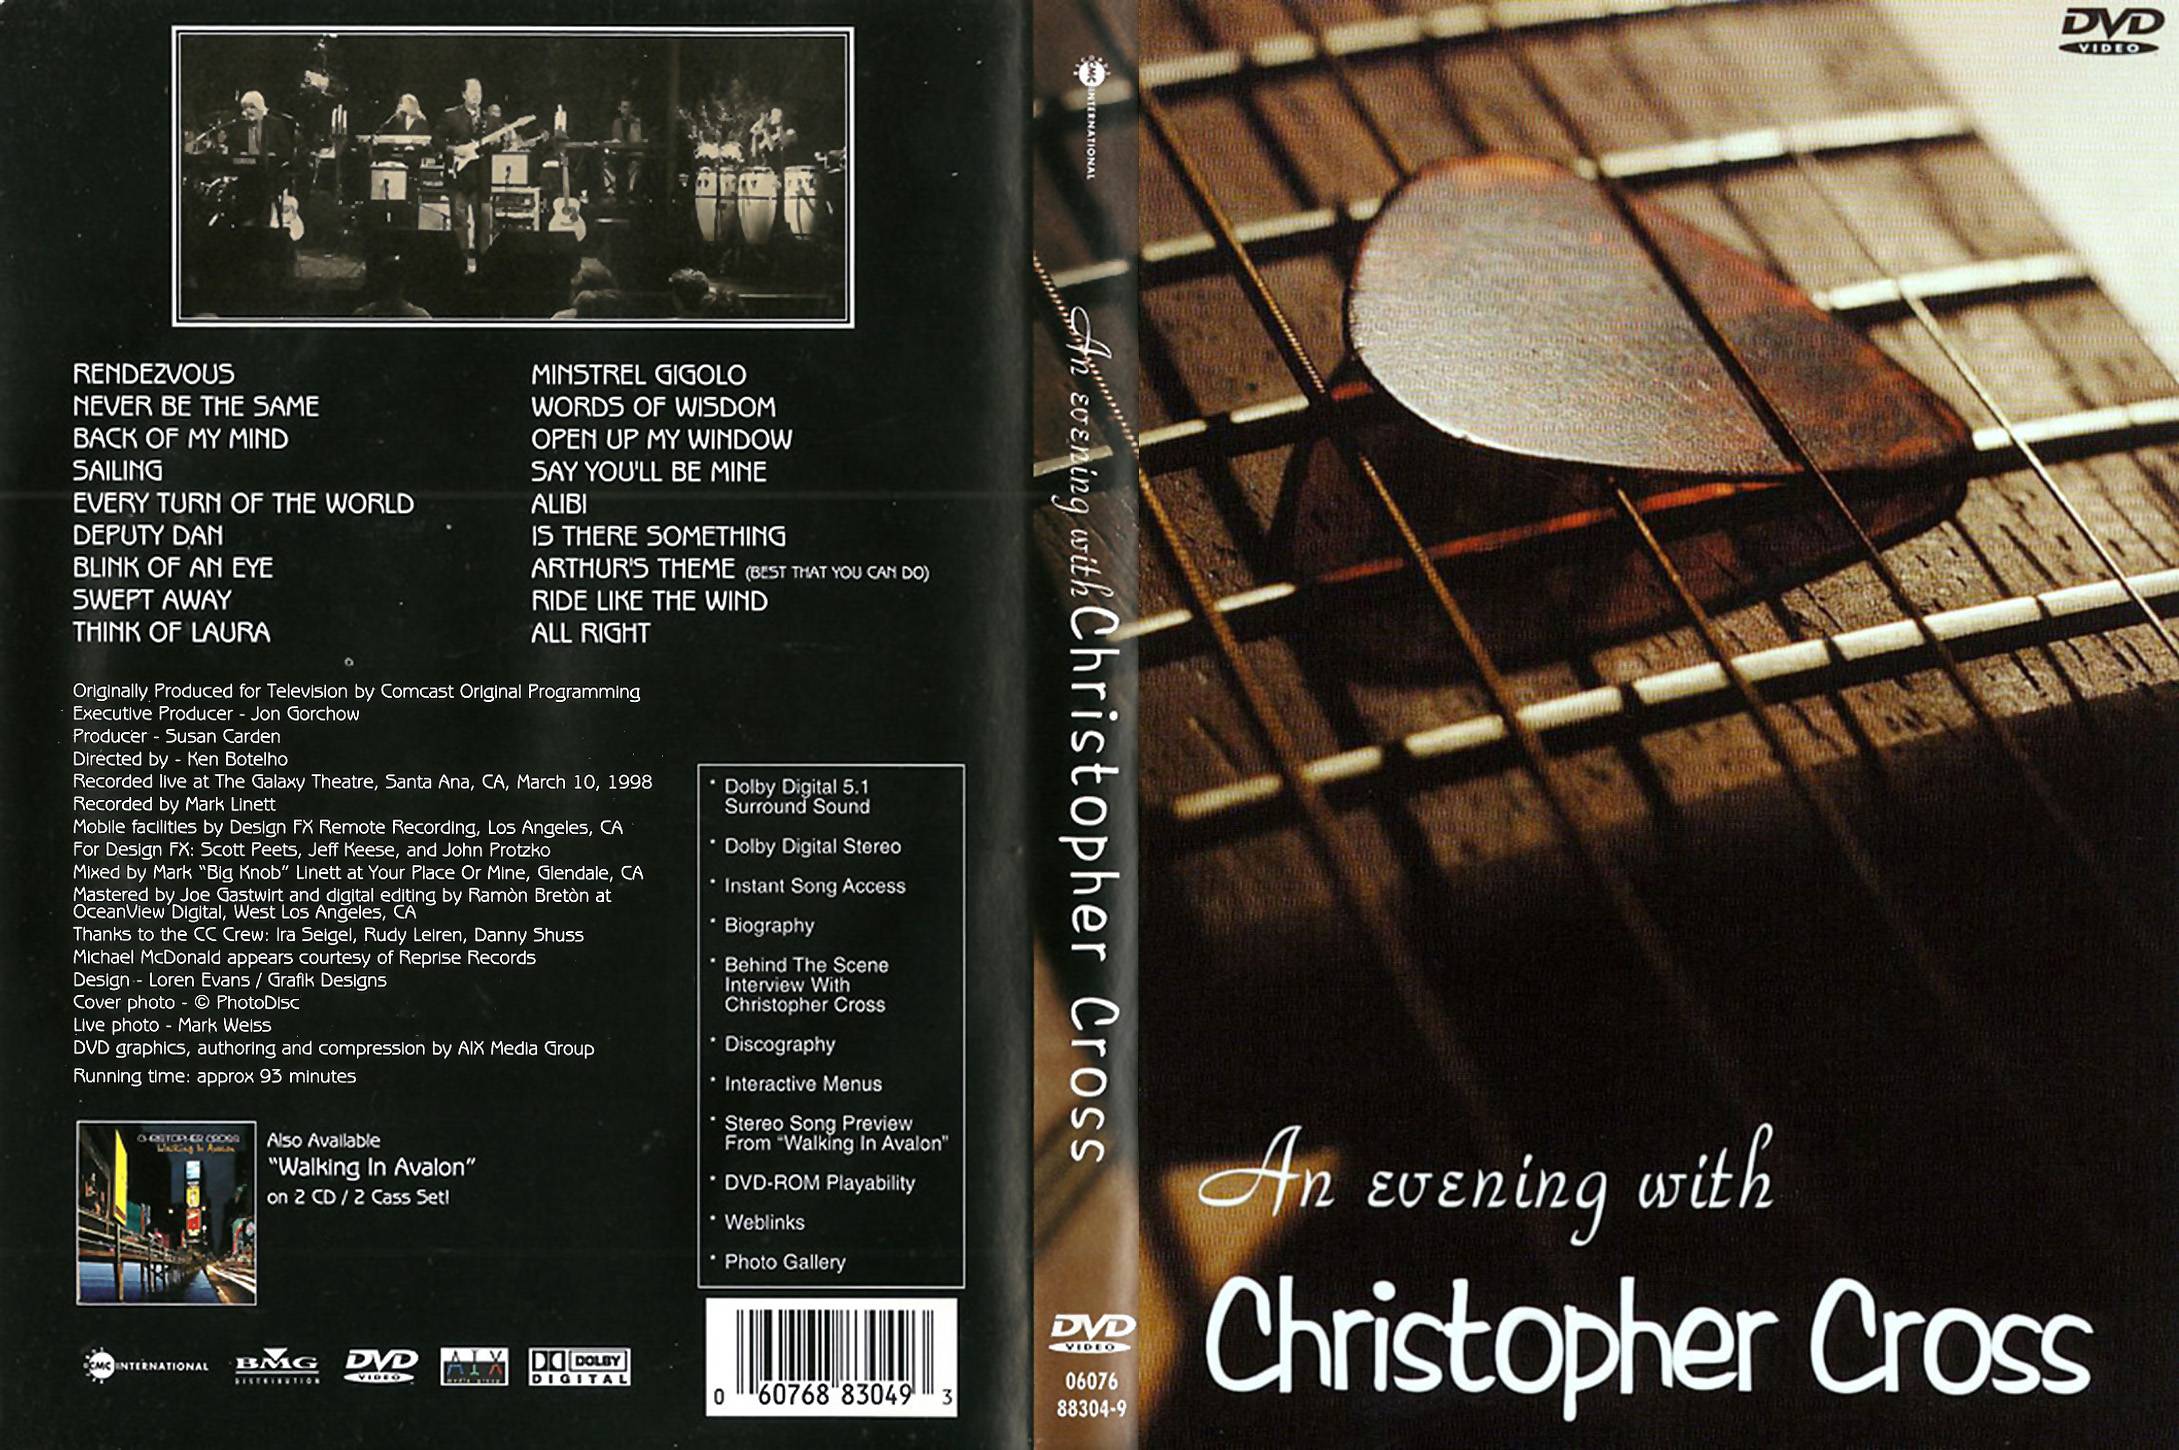 Christopher Cross - An Evening With Christopher Cross (1999) - front.